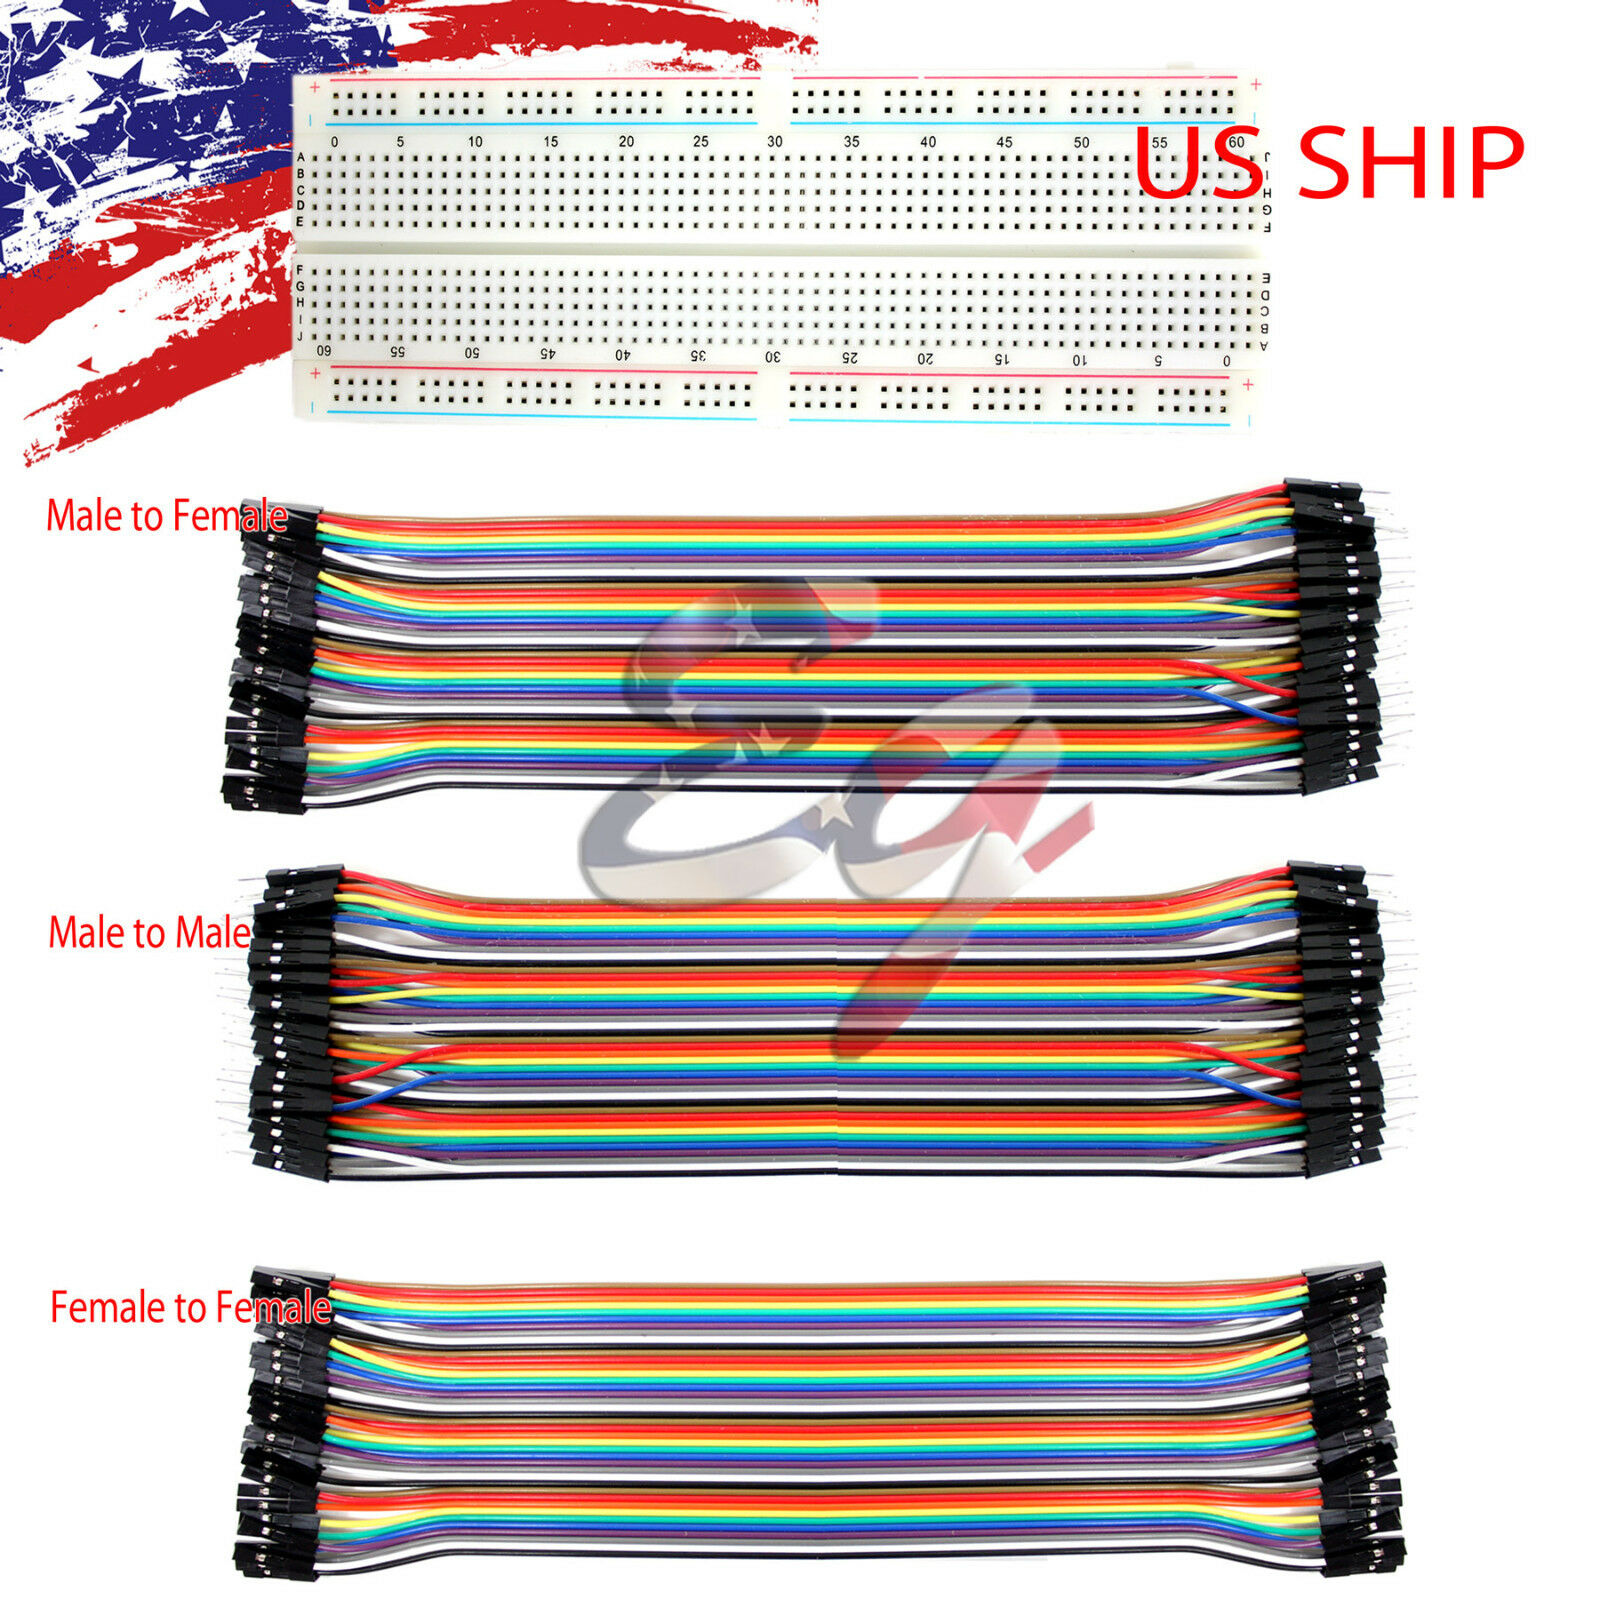 830 Tie Points Solderless Pcb Breadboard Mb102 + 3 Dupont Jumper Cable Arduino